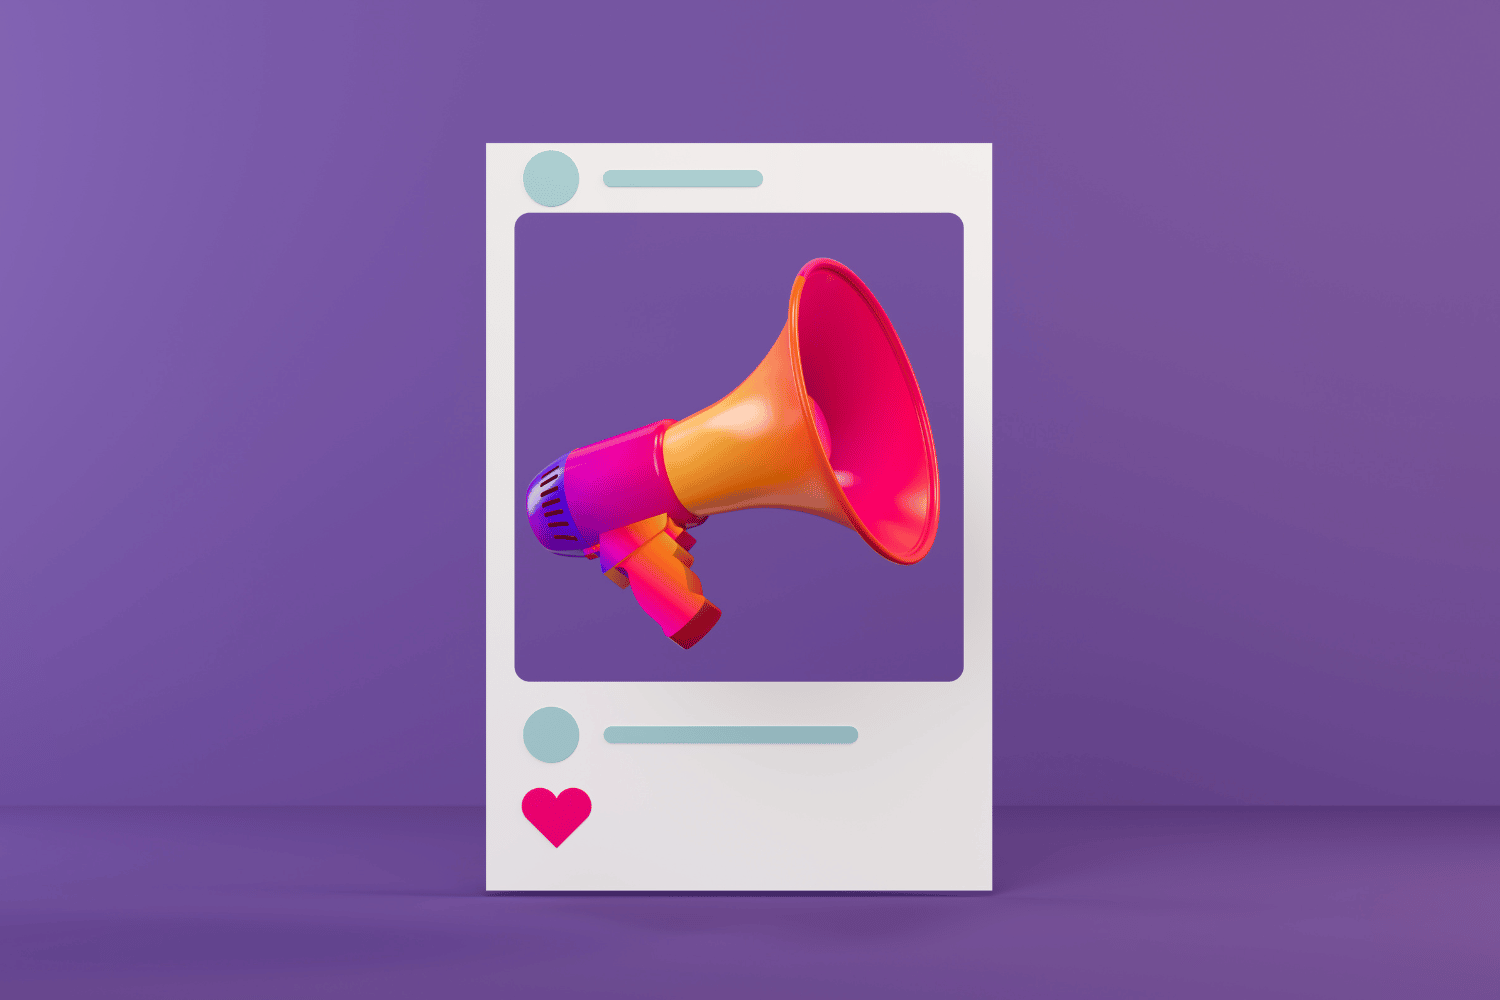 Image of a megaphone, with an instagram-like frame